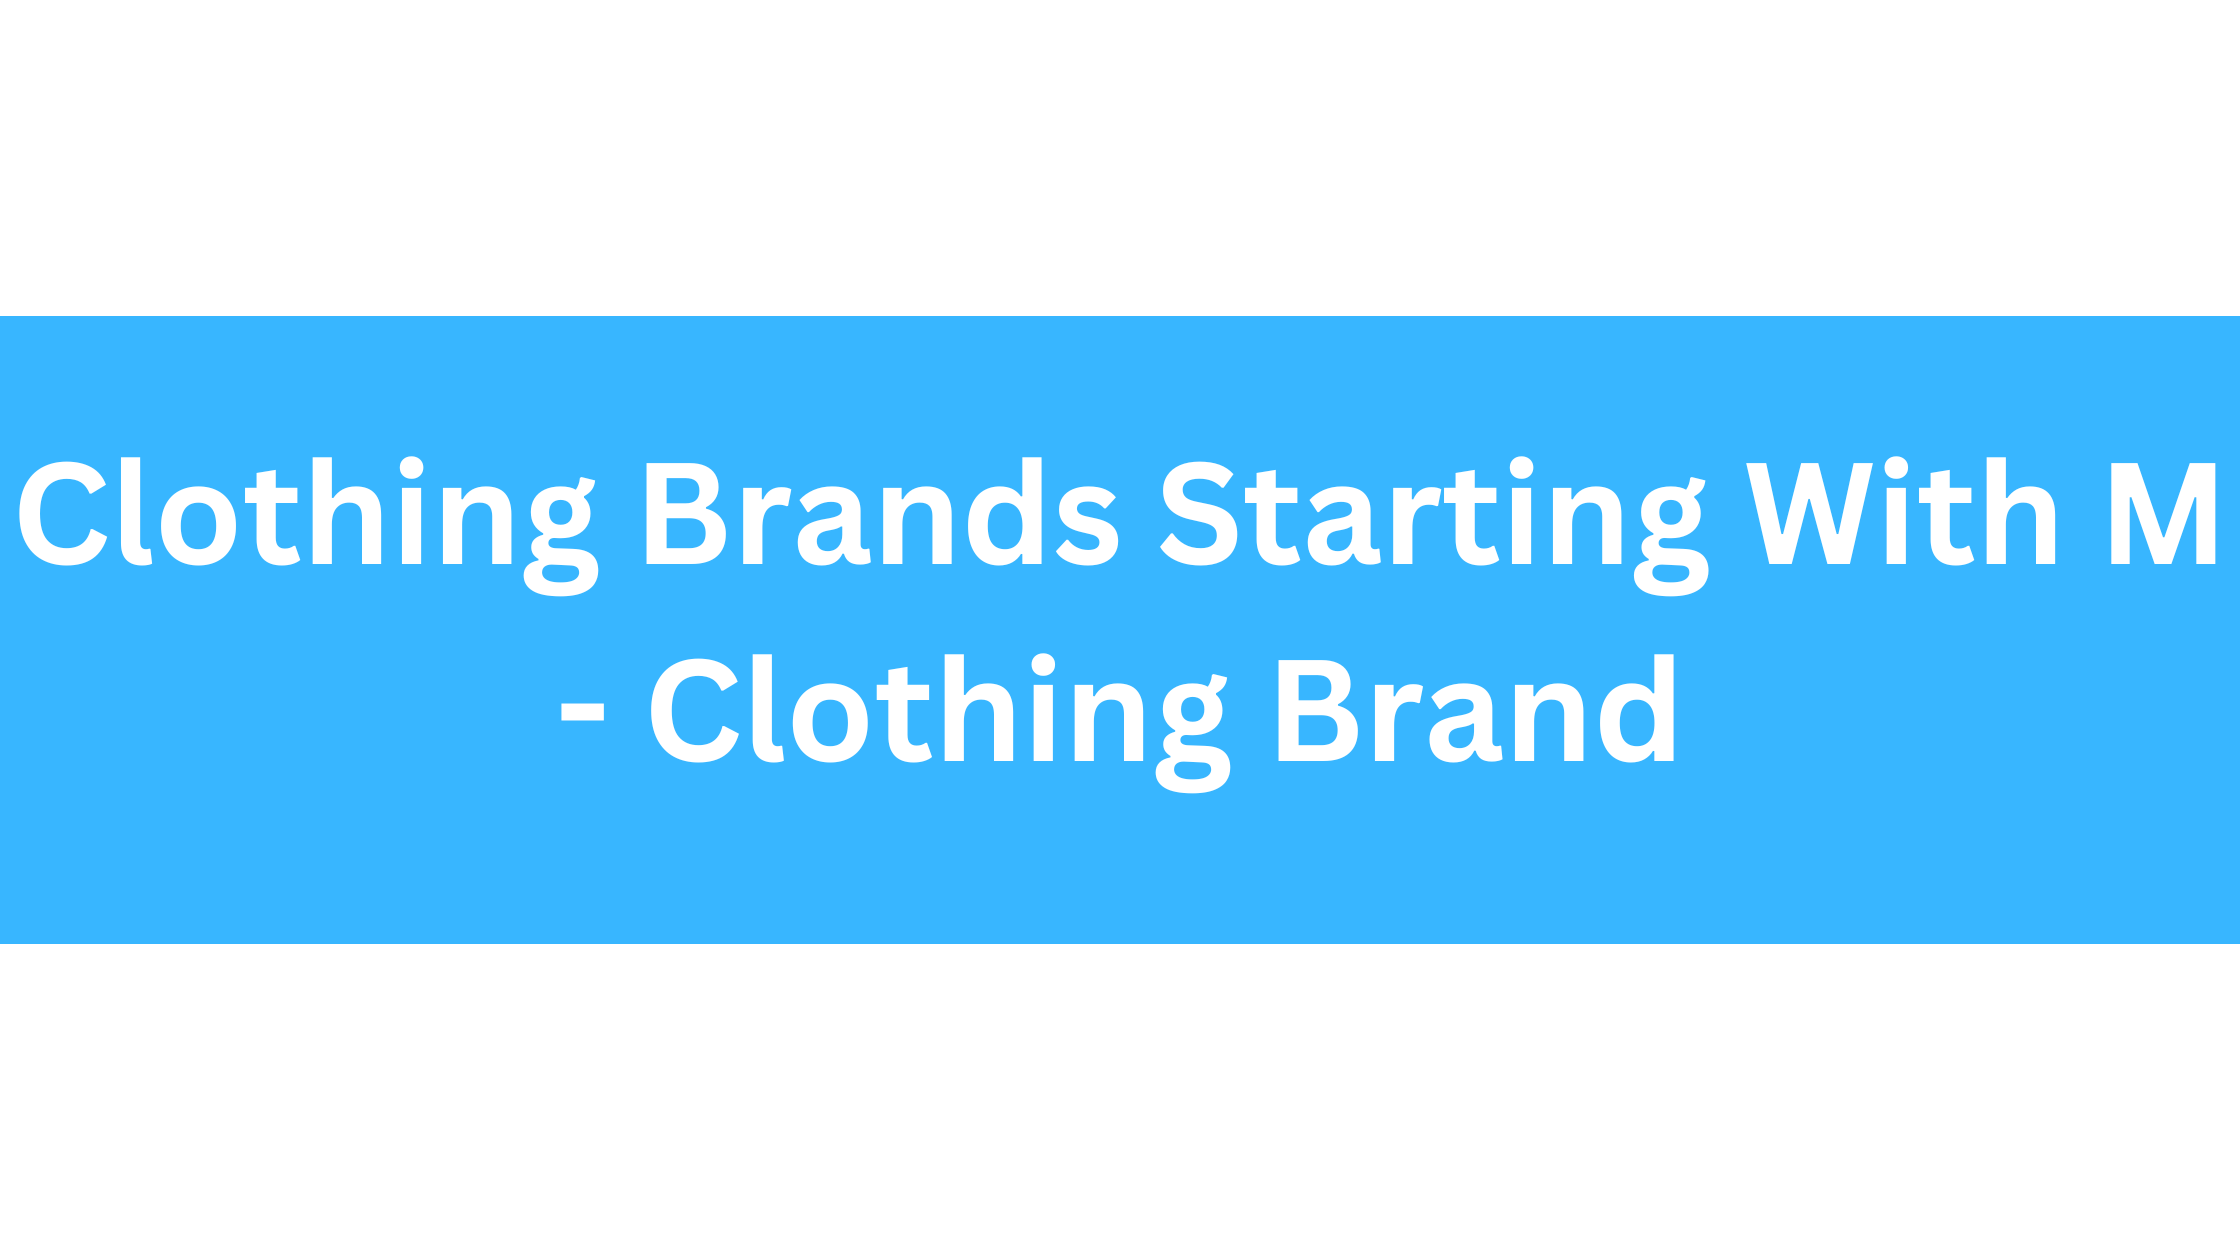 Clothing Brands Starting With M